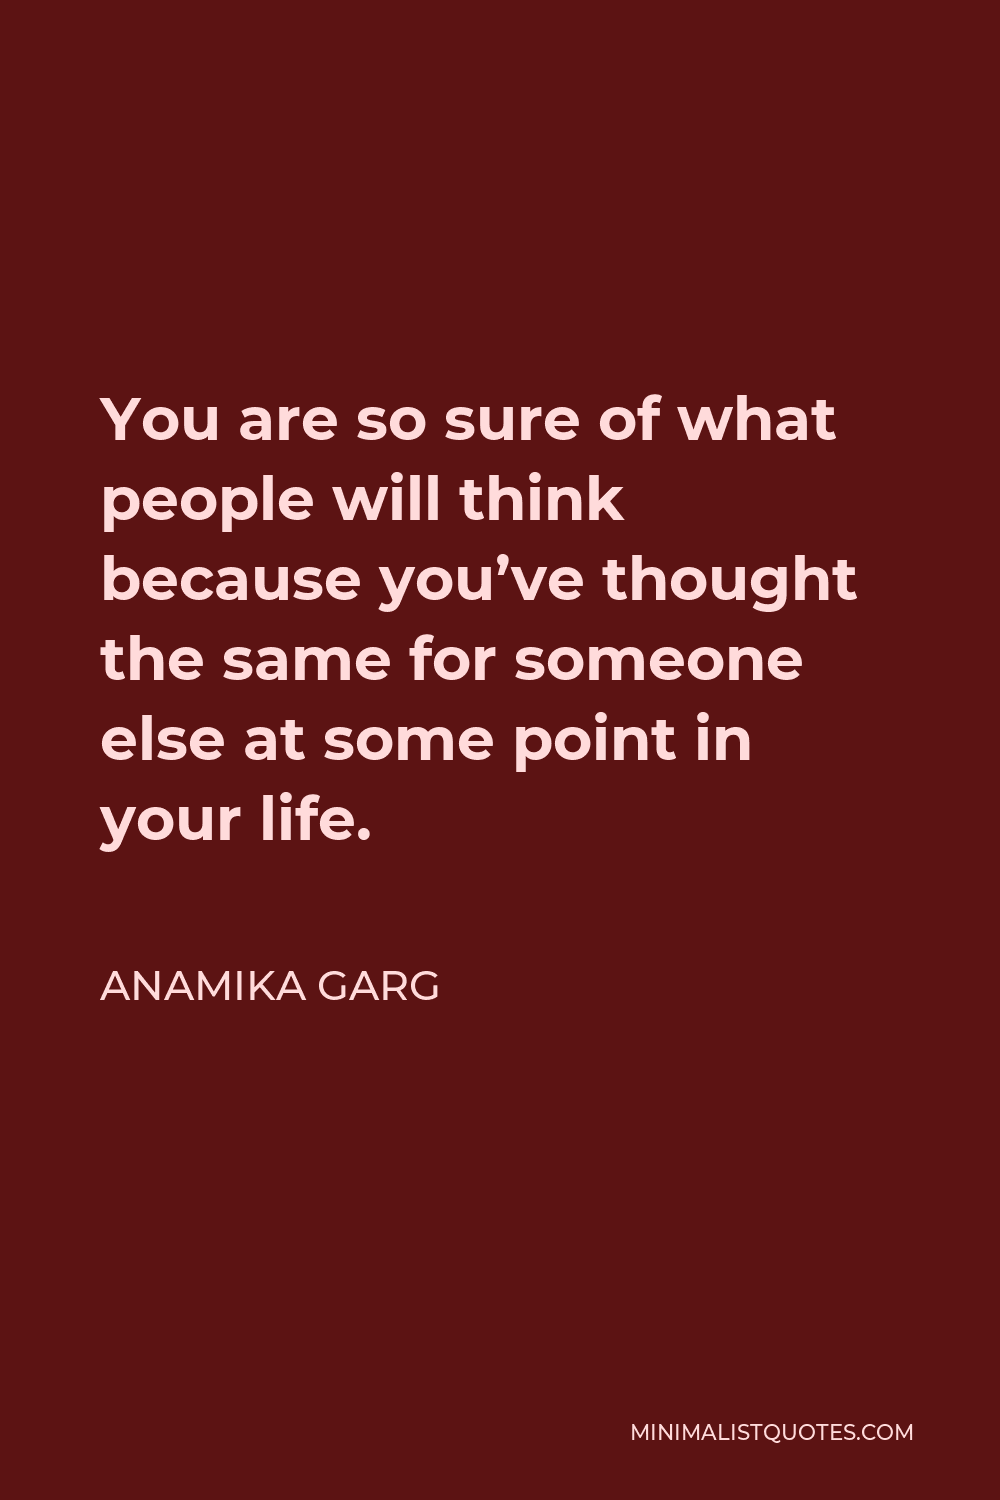 Anamika Garg Quote - You are so sure of what people will think because you’ve thought the same for someone else at some point in your life.